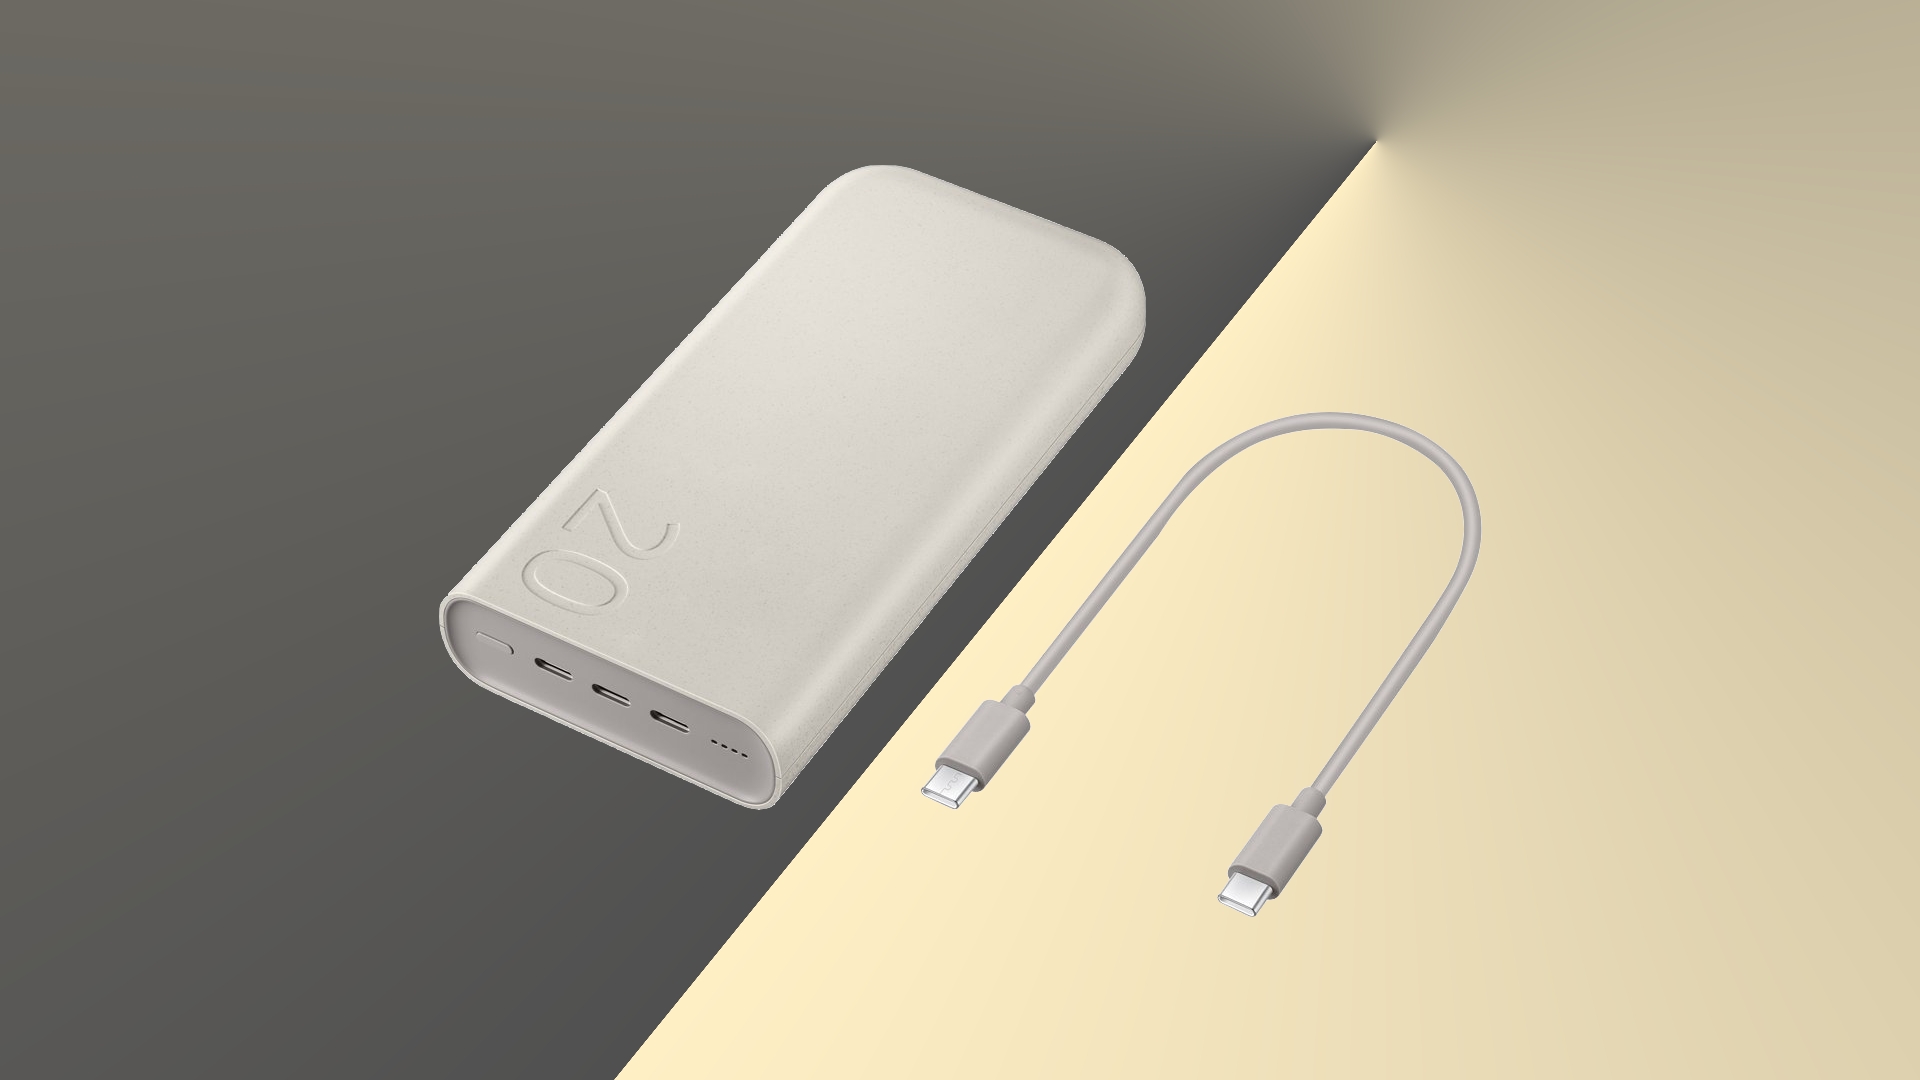 Samsung's 45W 20,000mAh power bank available for pre-order in the